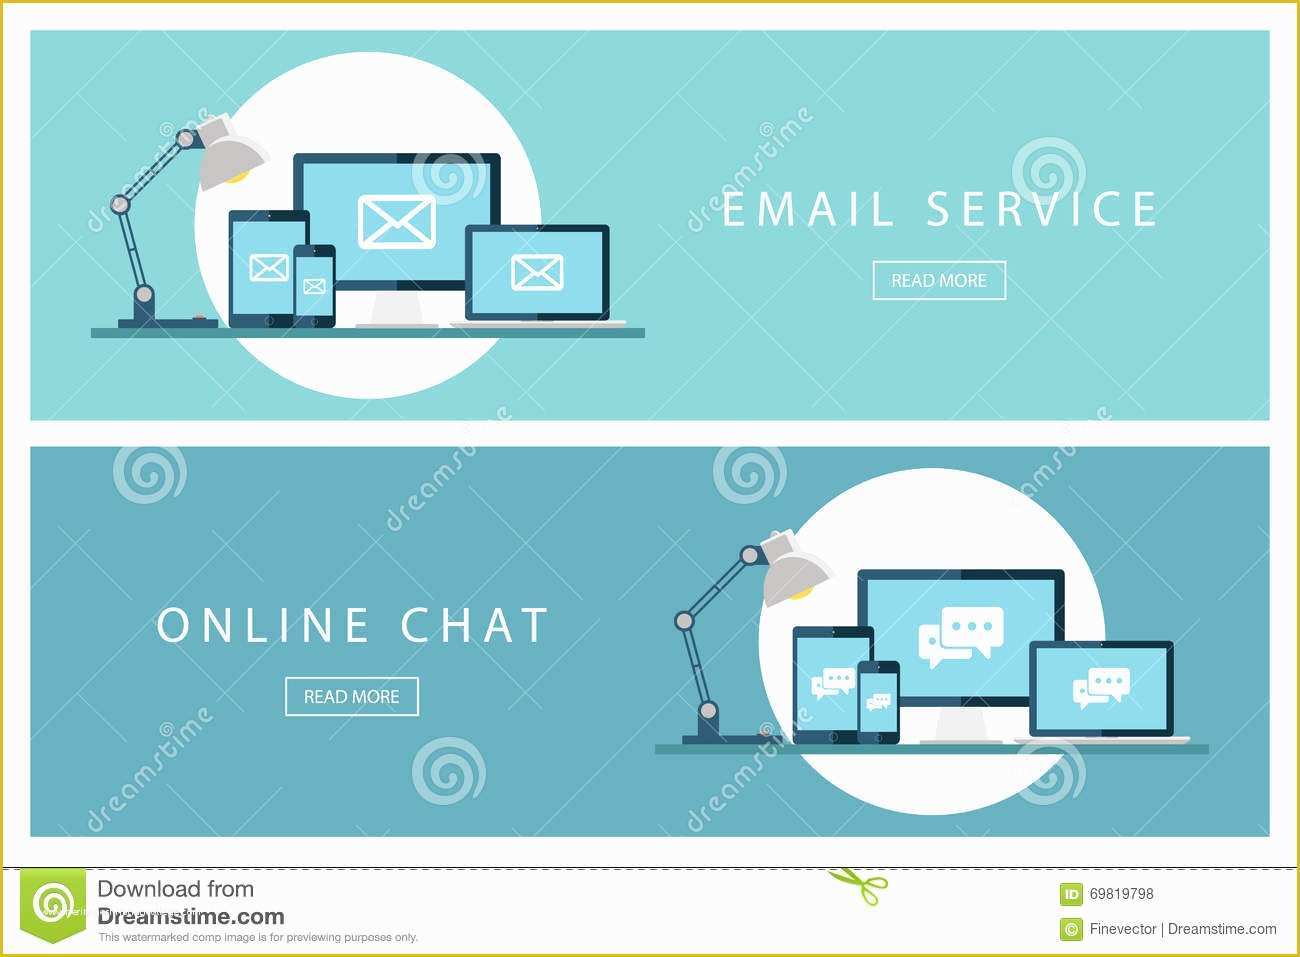 Free Chatting Website Templates Of Set Flat Design Concepts Email Service and Line Chat